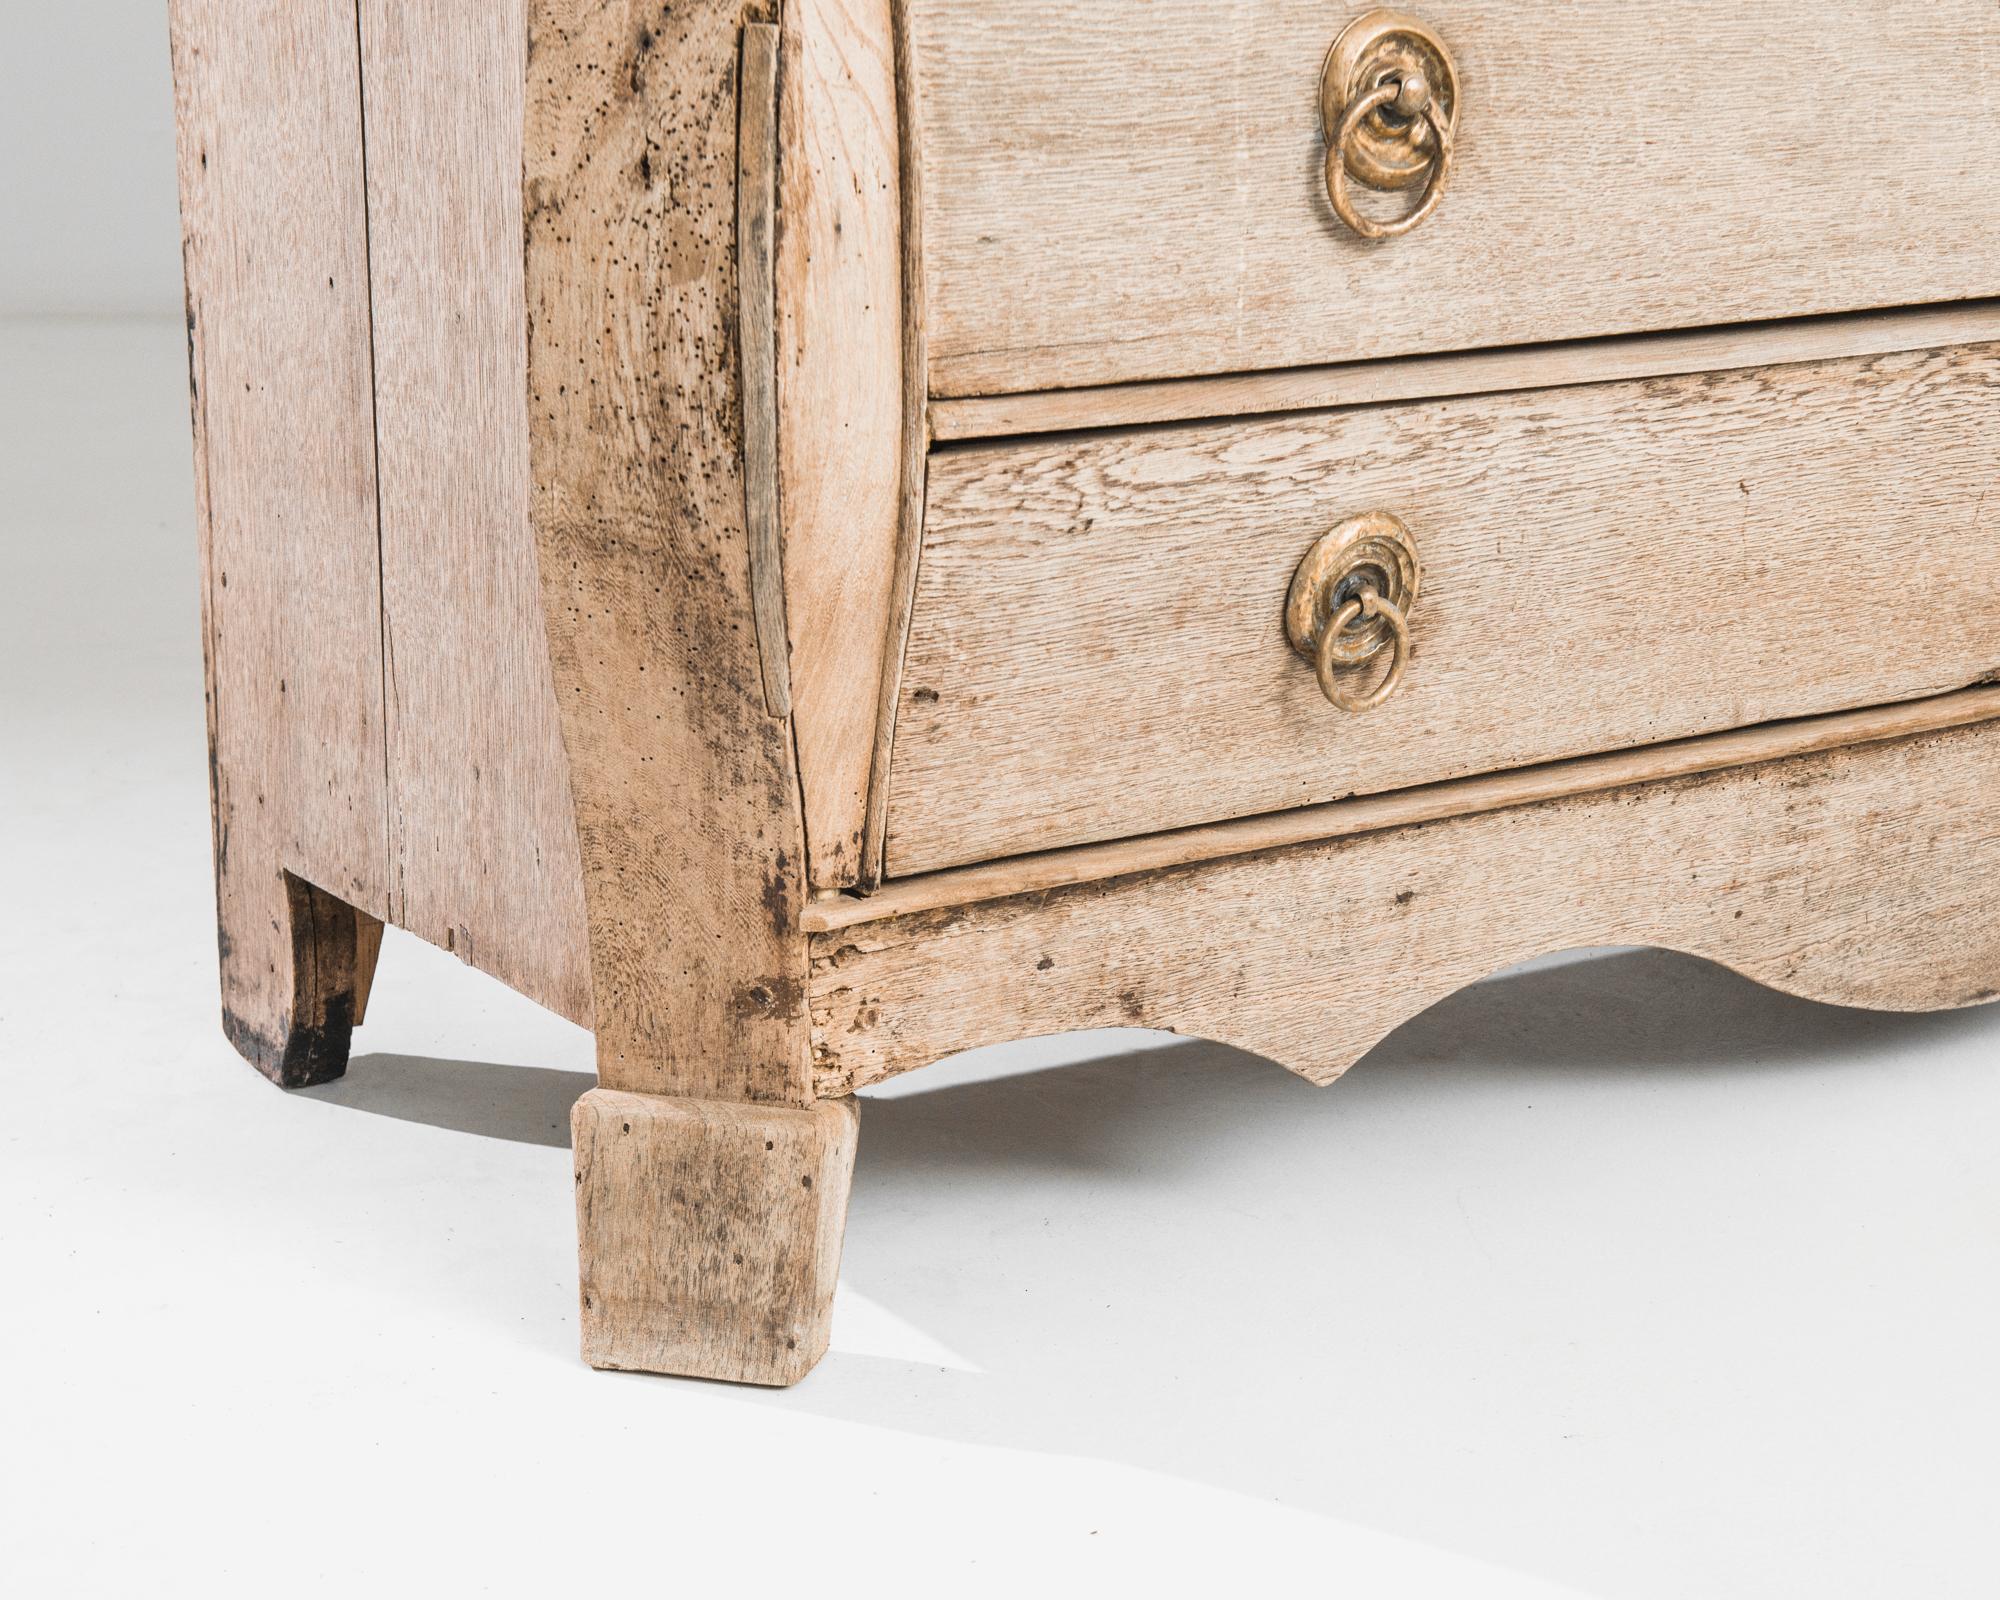 Embark on a journey to the opulent 1780s with this Dutch Bleached Oak Cabinet, a manifestation of Baroque elegance. The graceful scalloped apron at the bottom sets the stage for a piece that is nothing short of regal. Adorned in Baroque style, the